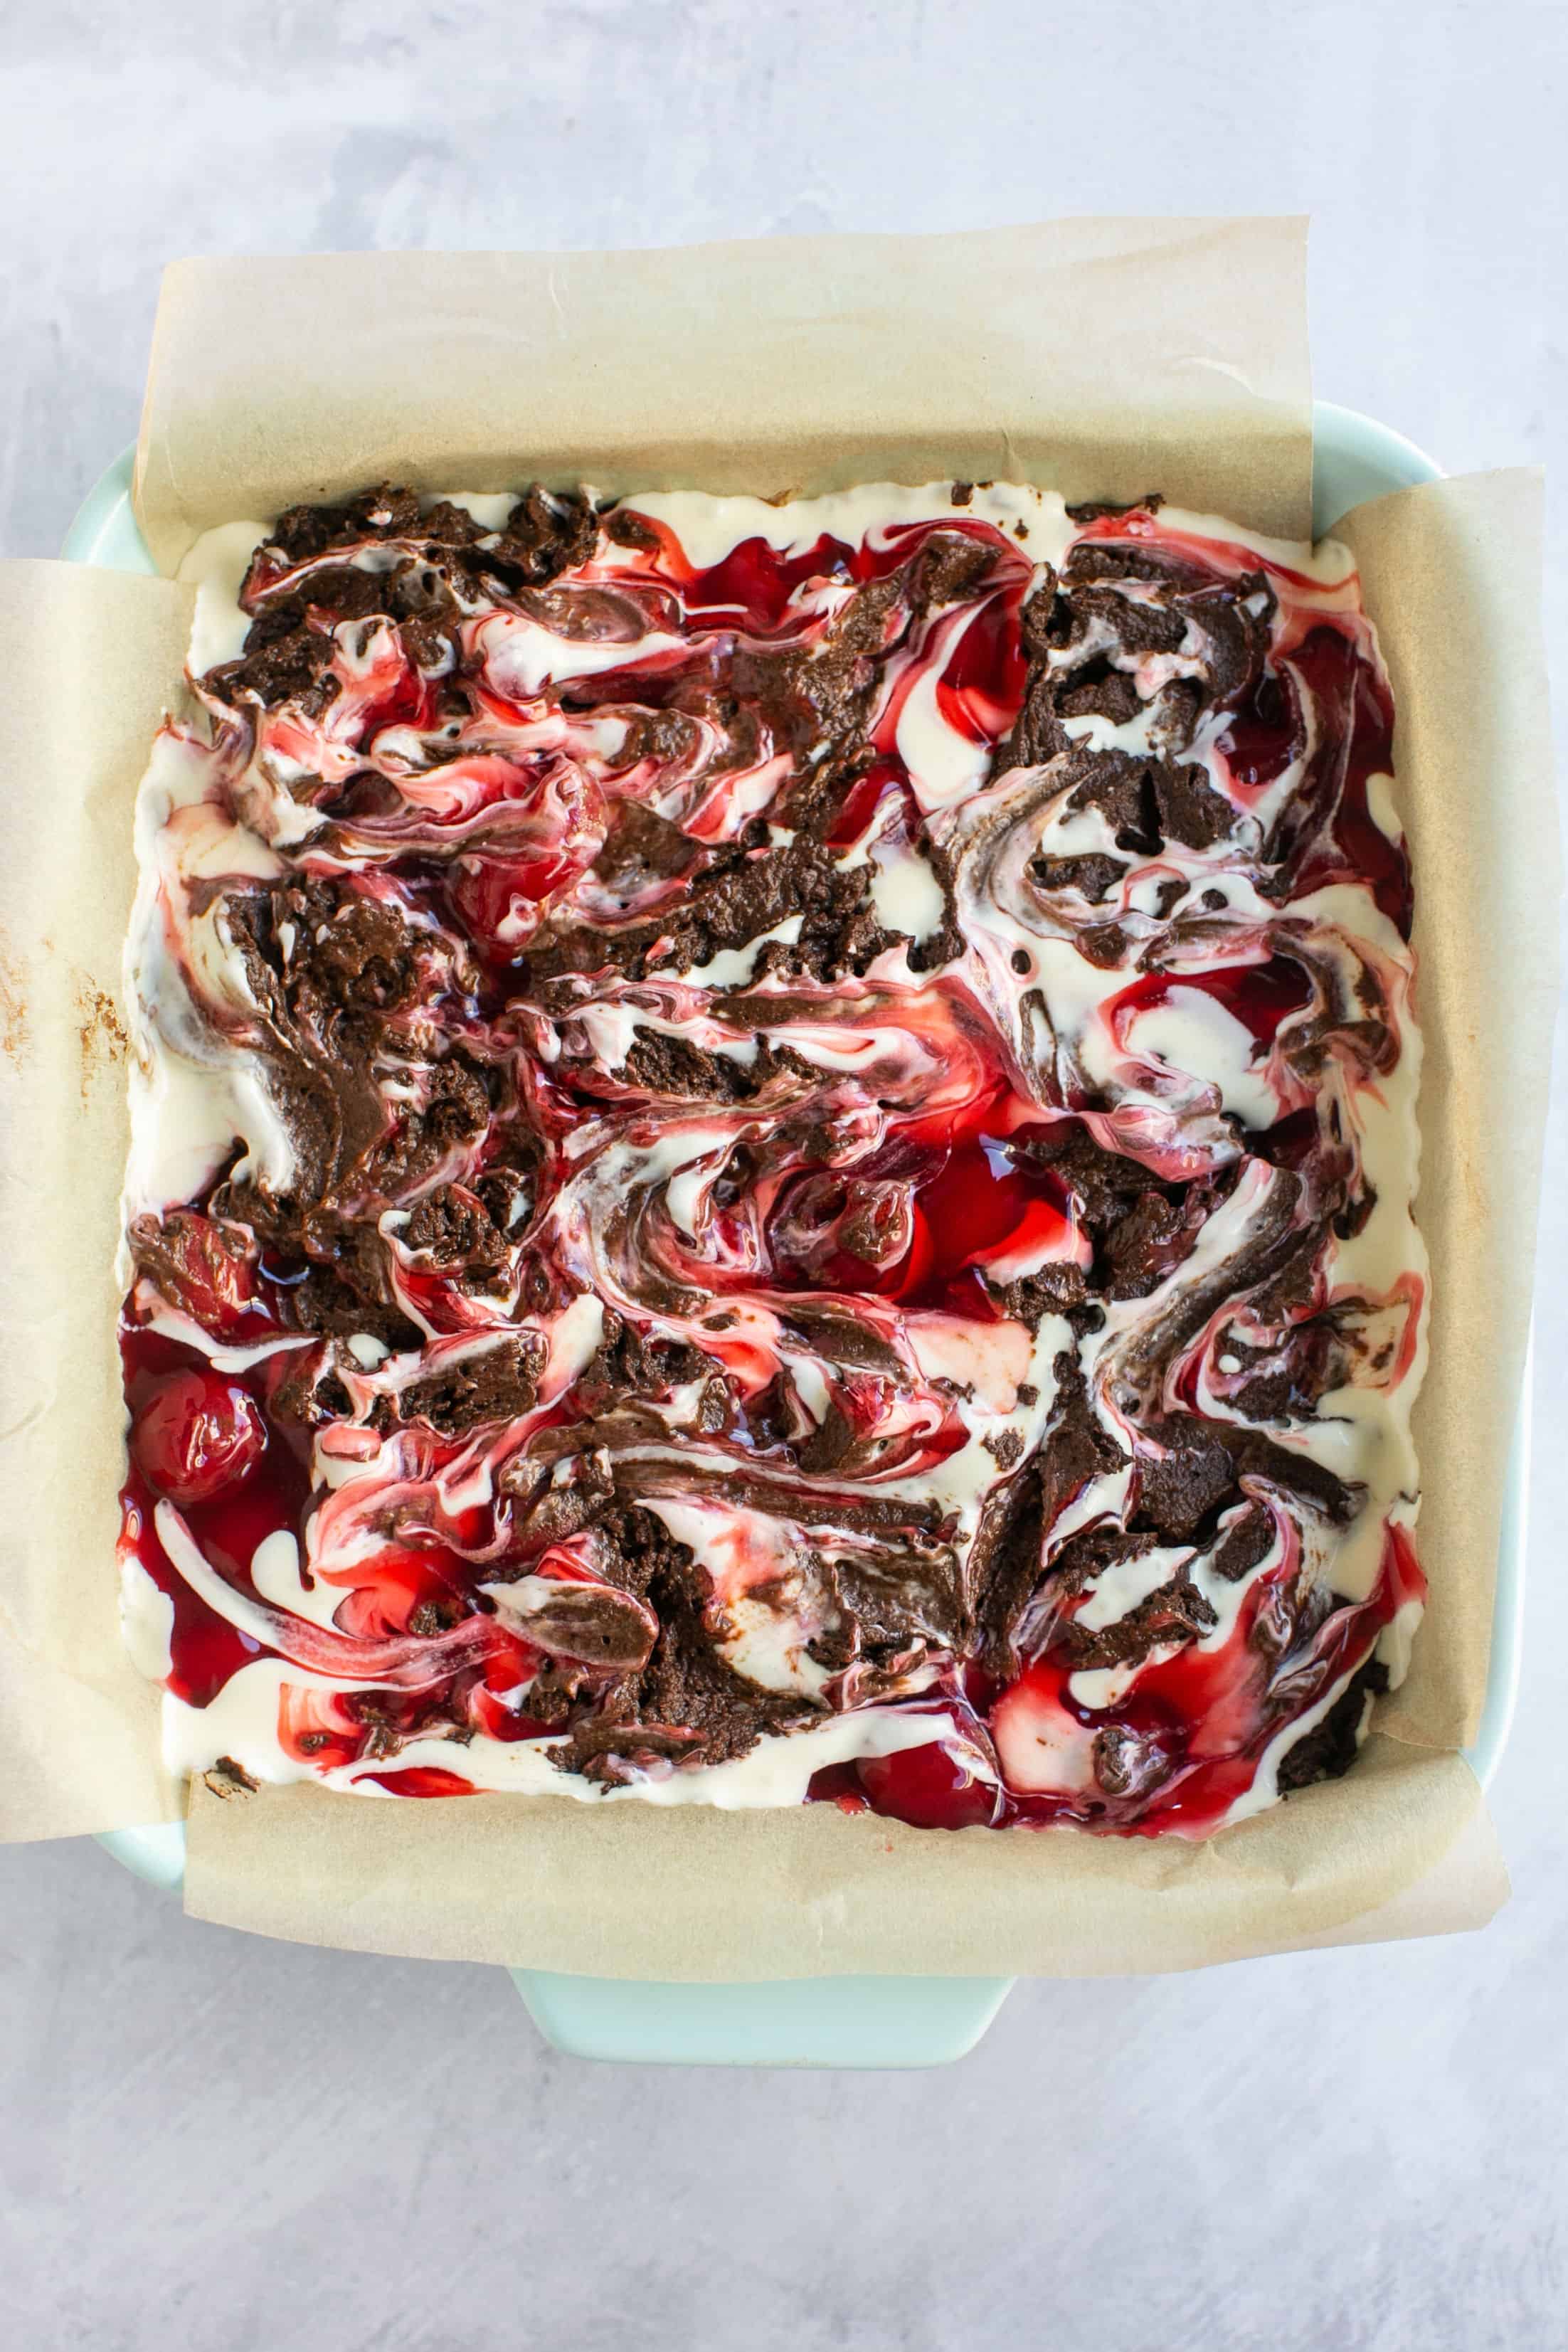 Cherry cheesecake brownie batter in a square baking dish after being swirled together.